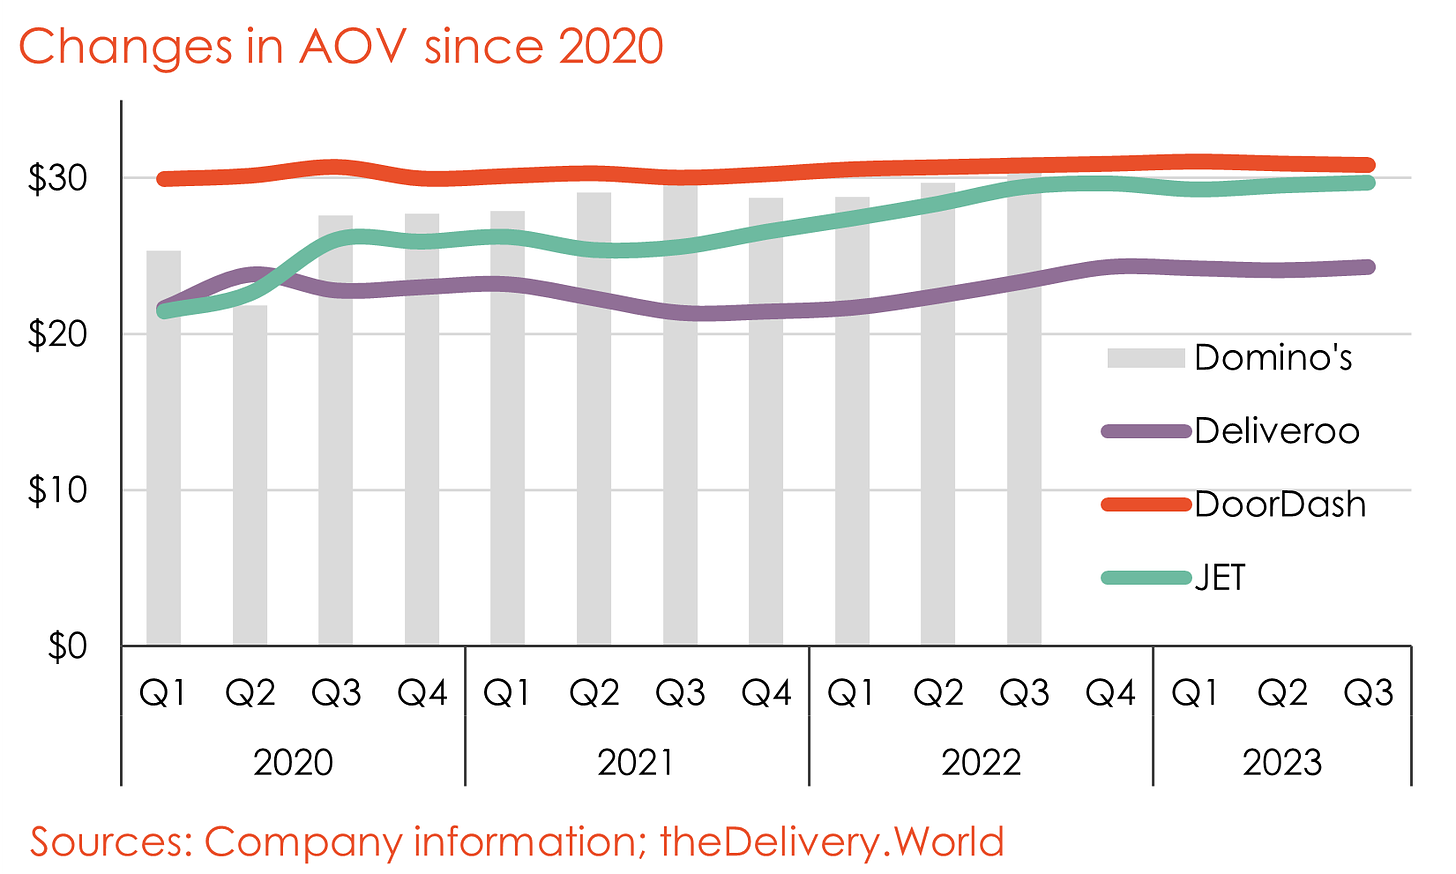 Chart showing Changes in AOV since 2020 for Domino's, Deliveroo, DoorDash and JET